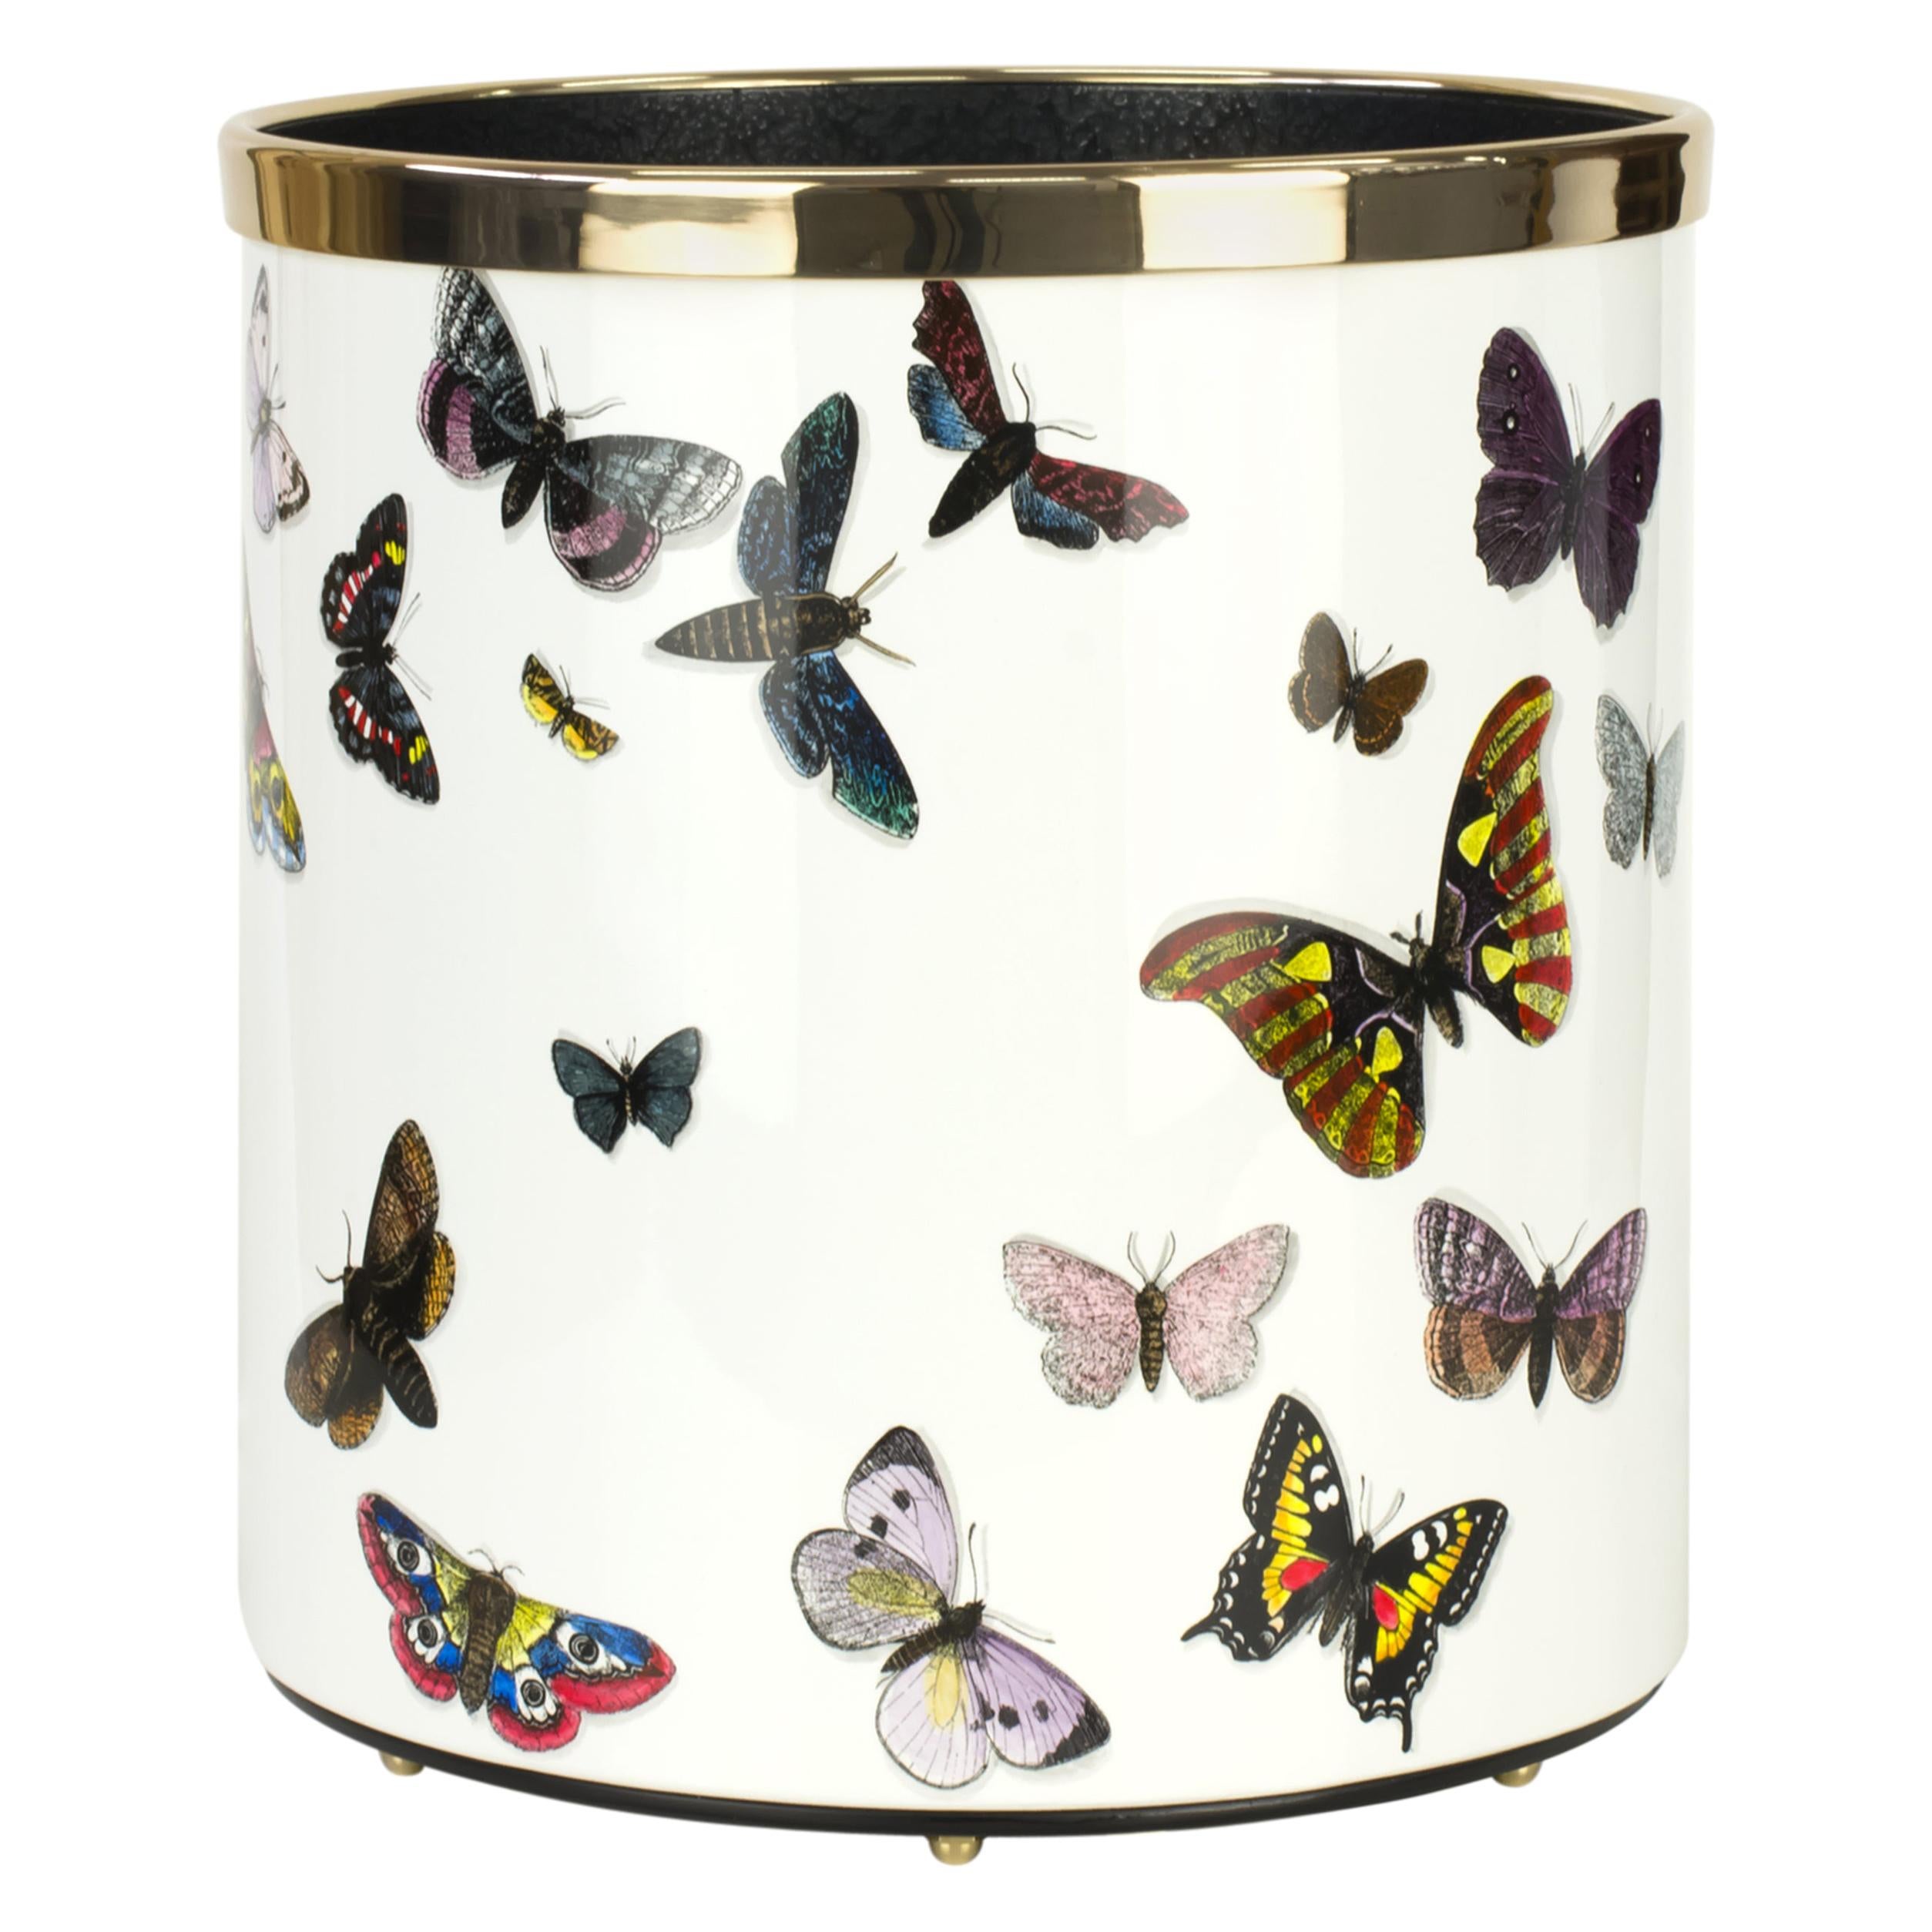 Fornasetti Paper Basket Farfalle Butterflies Hand Colored on White Metal Brass